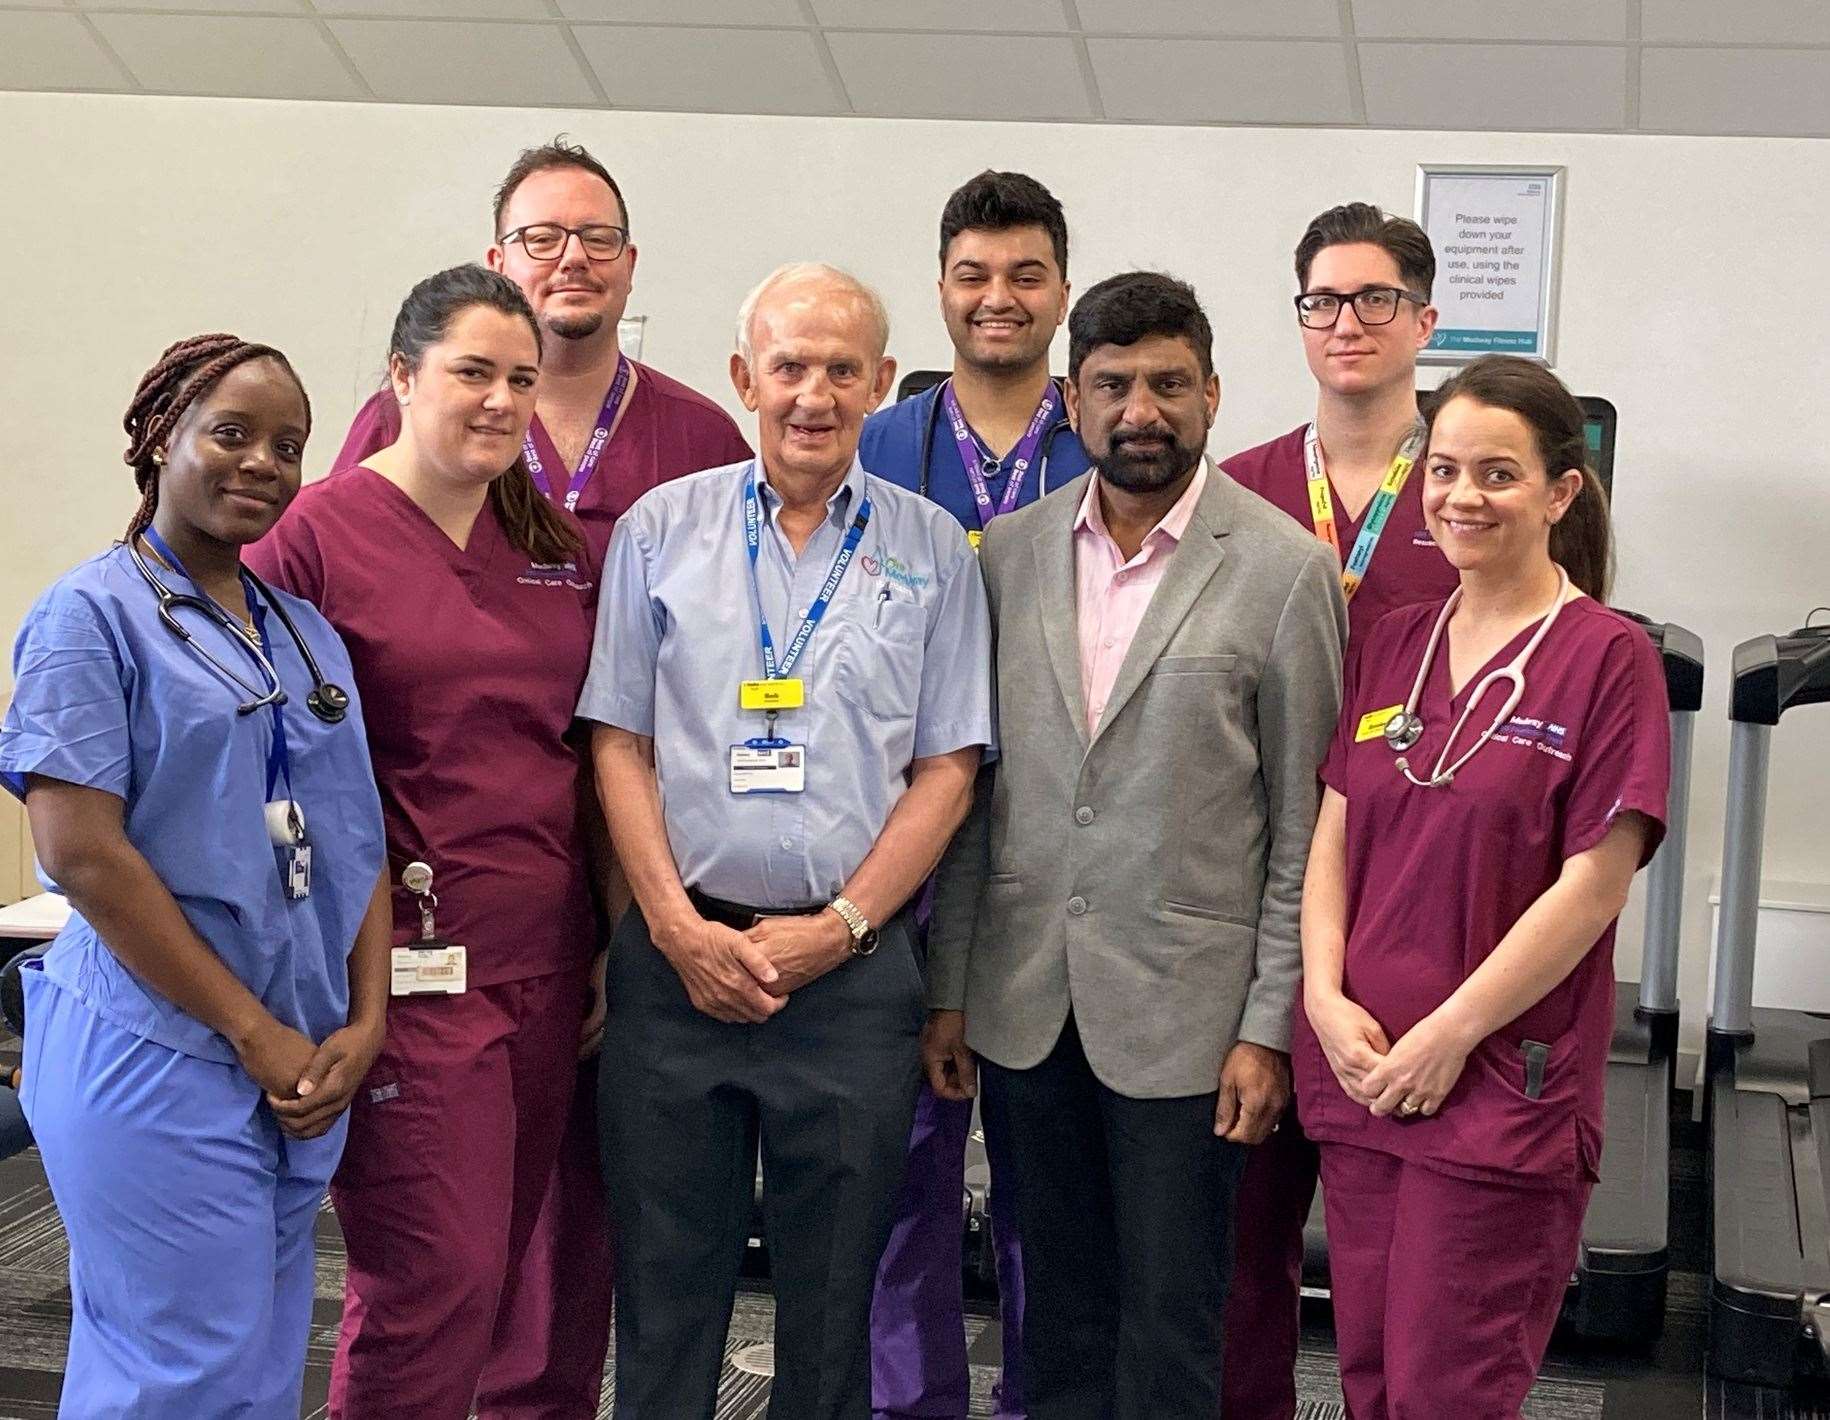 Bob, pictured centre, with some of the staff at Medway Maritime Hospital who helped save his life. Photo: Medway NHS Foundation Trust